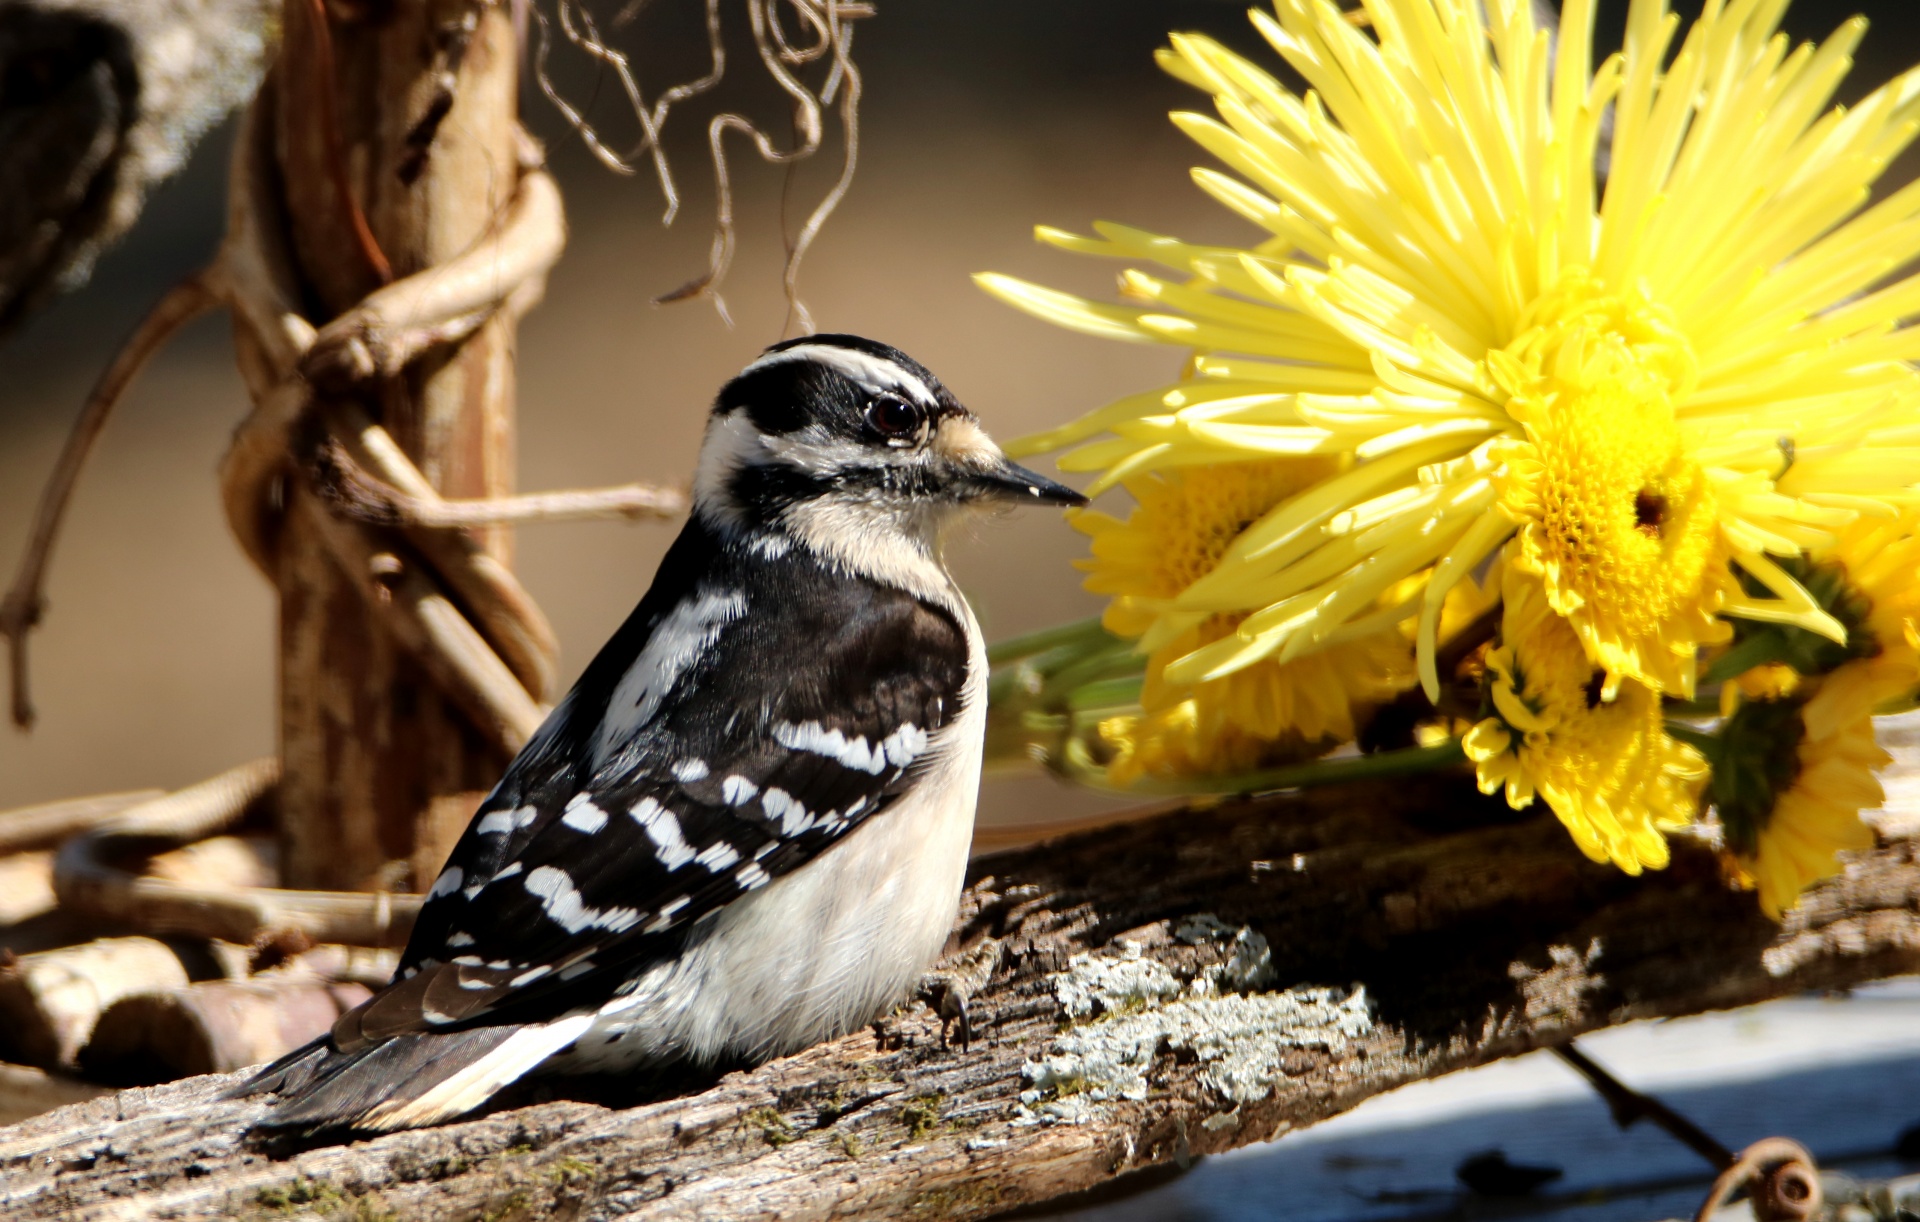 Close-up of a female downy woodpecker as it stands on a dead tree branch with yellow mums in the background.